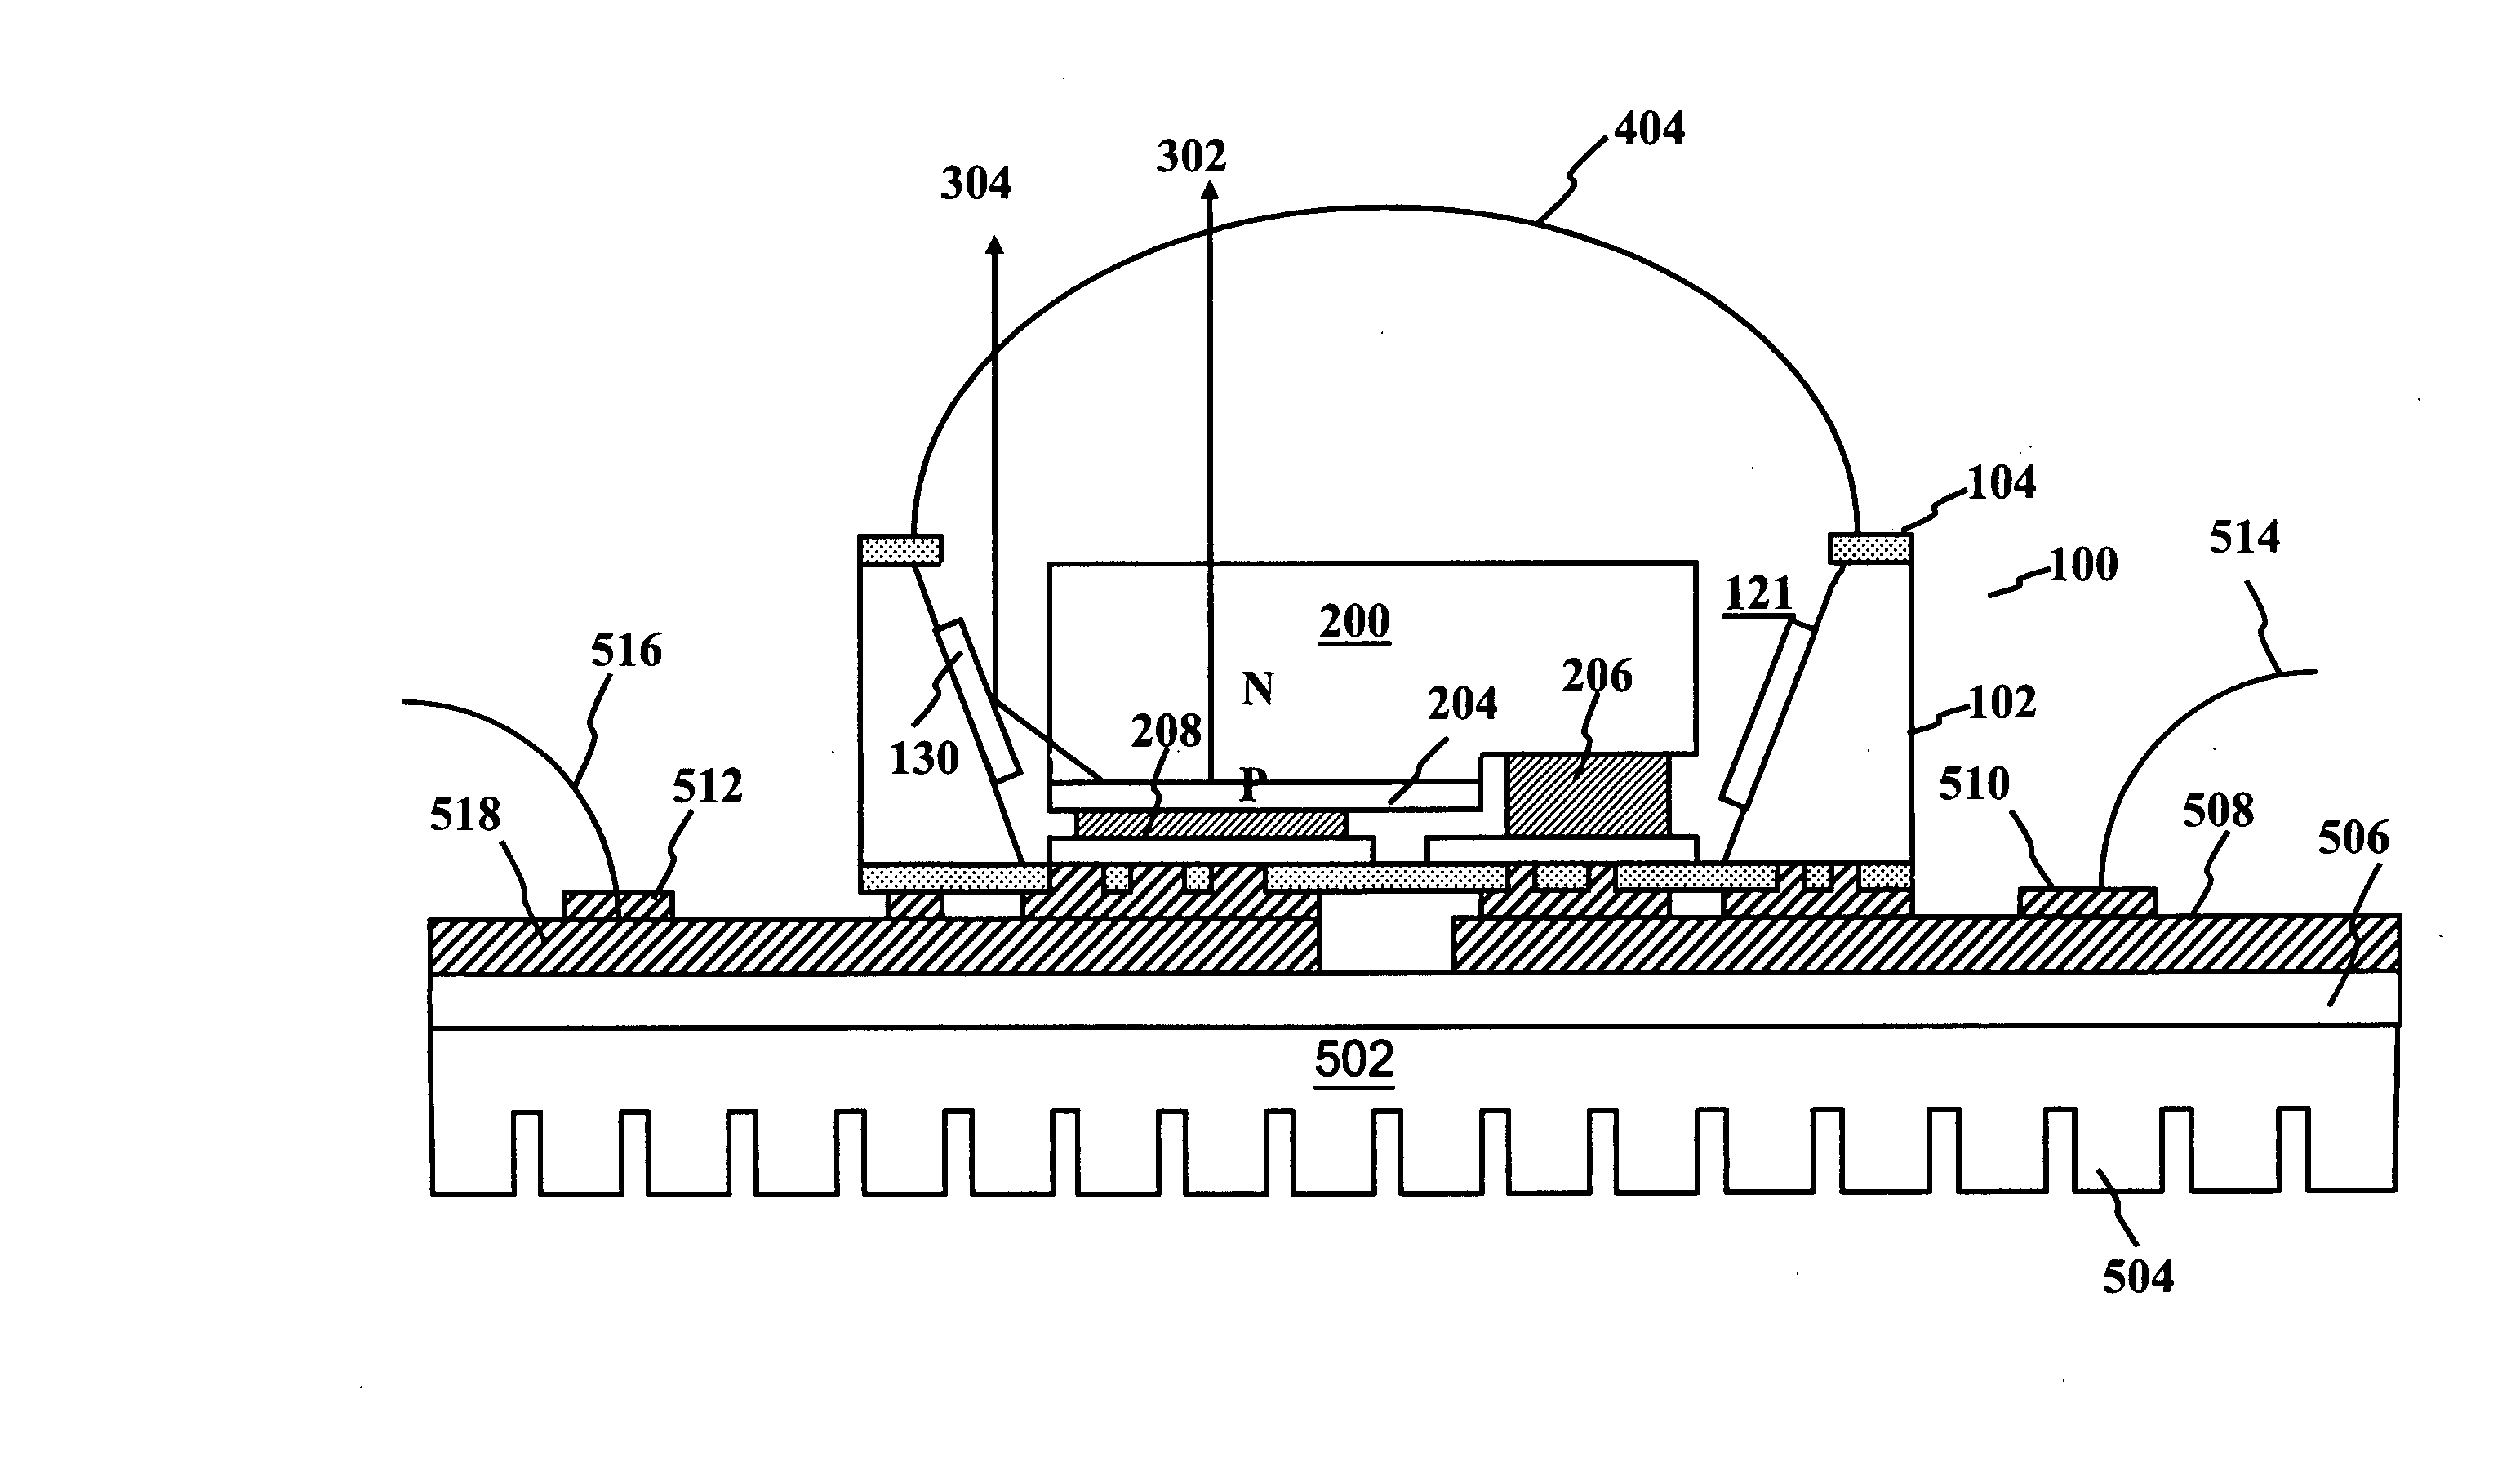 Wire-bonding free packaging structure of light emitted diode